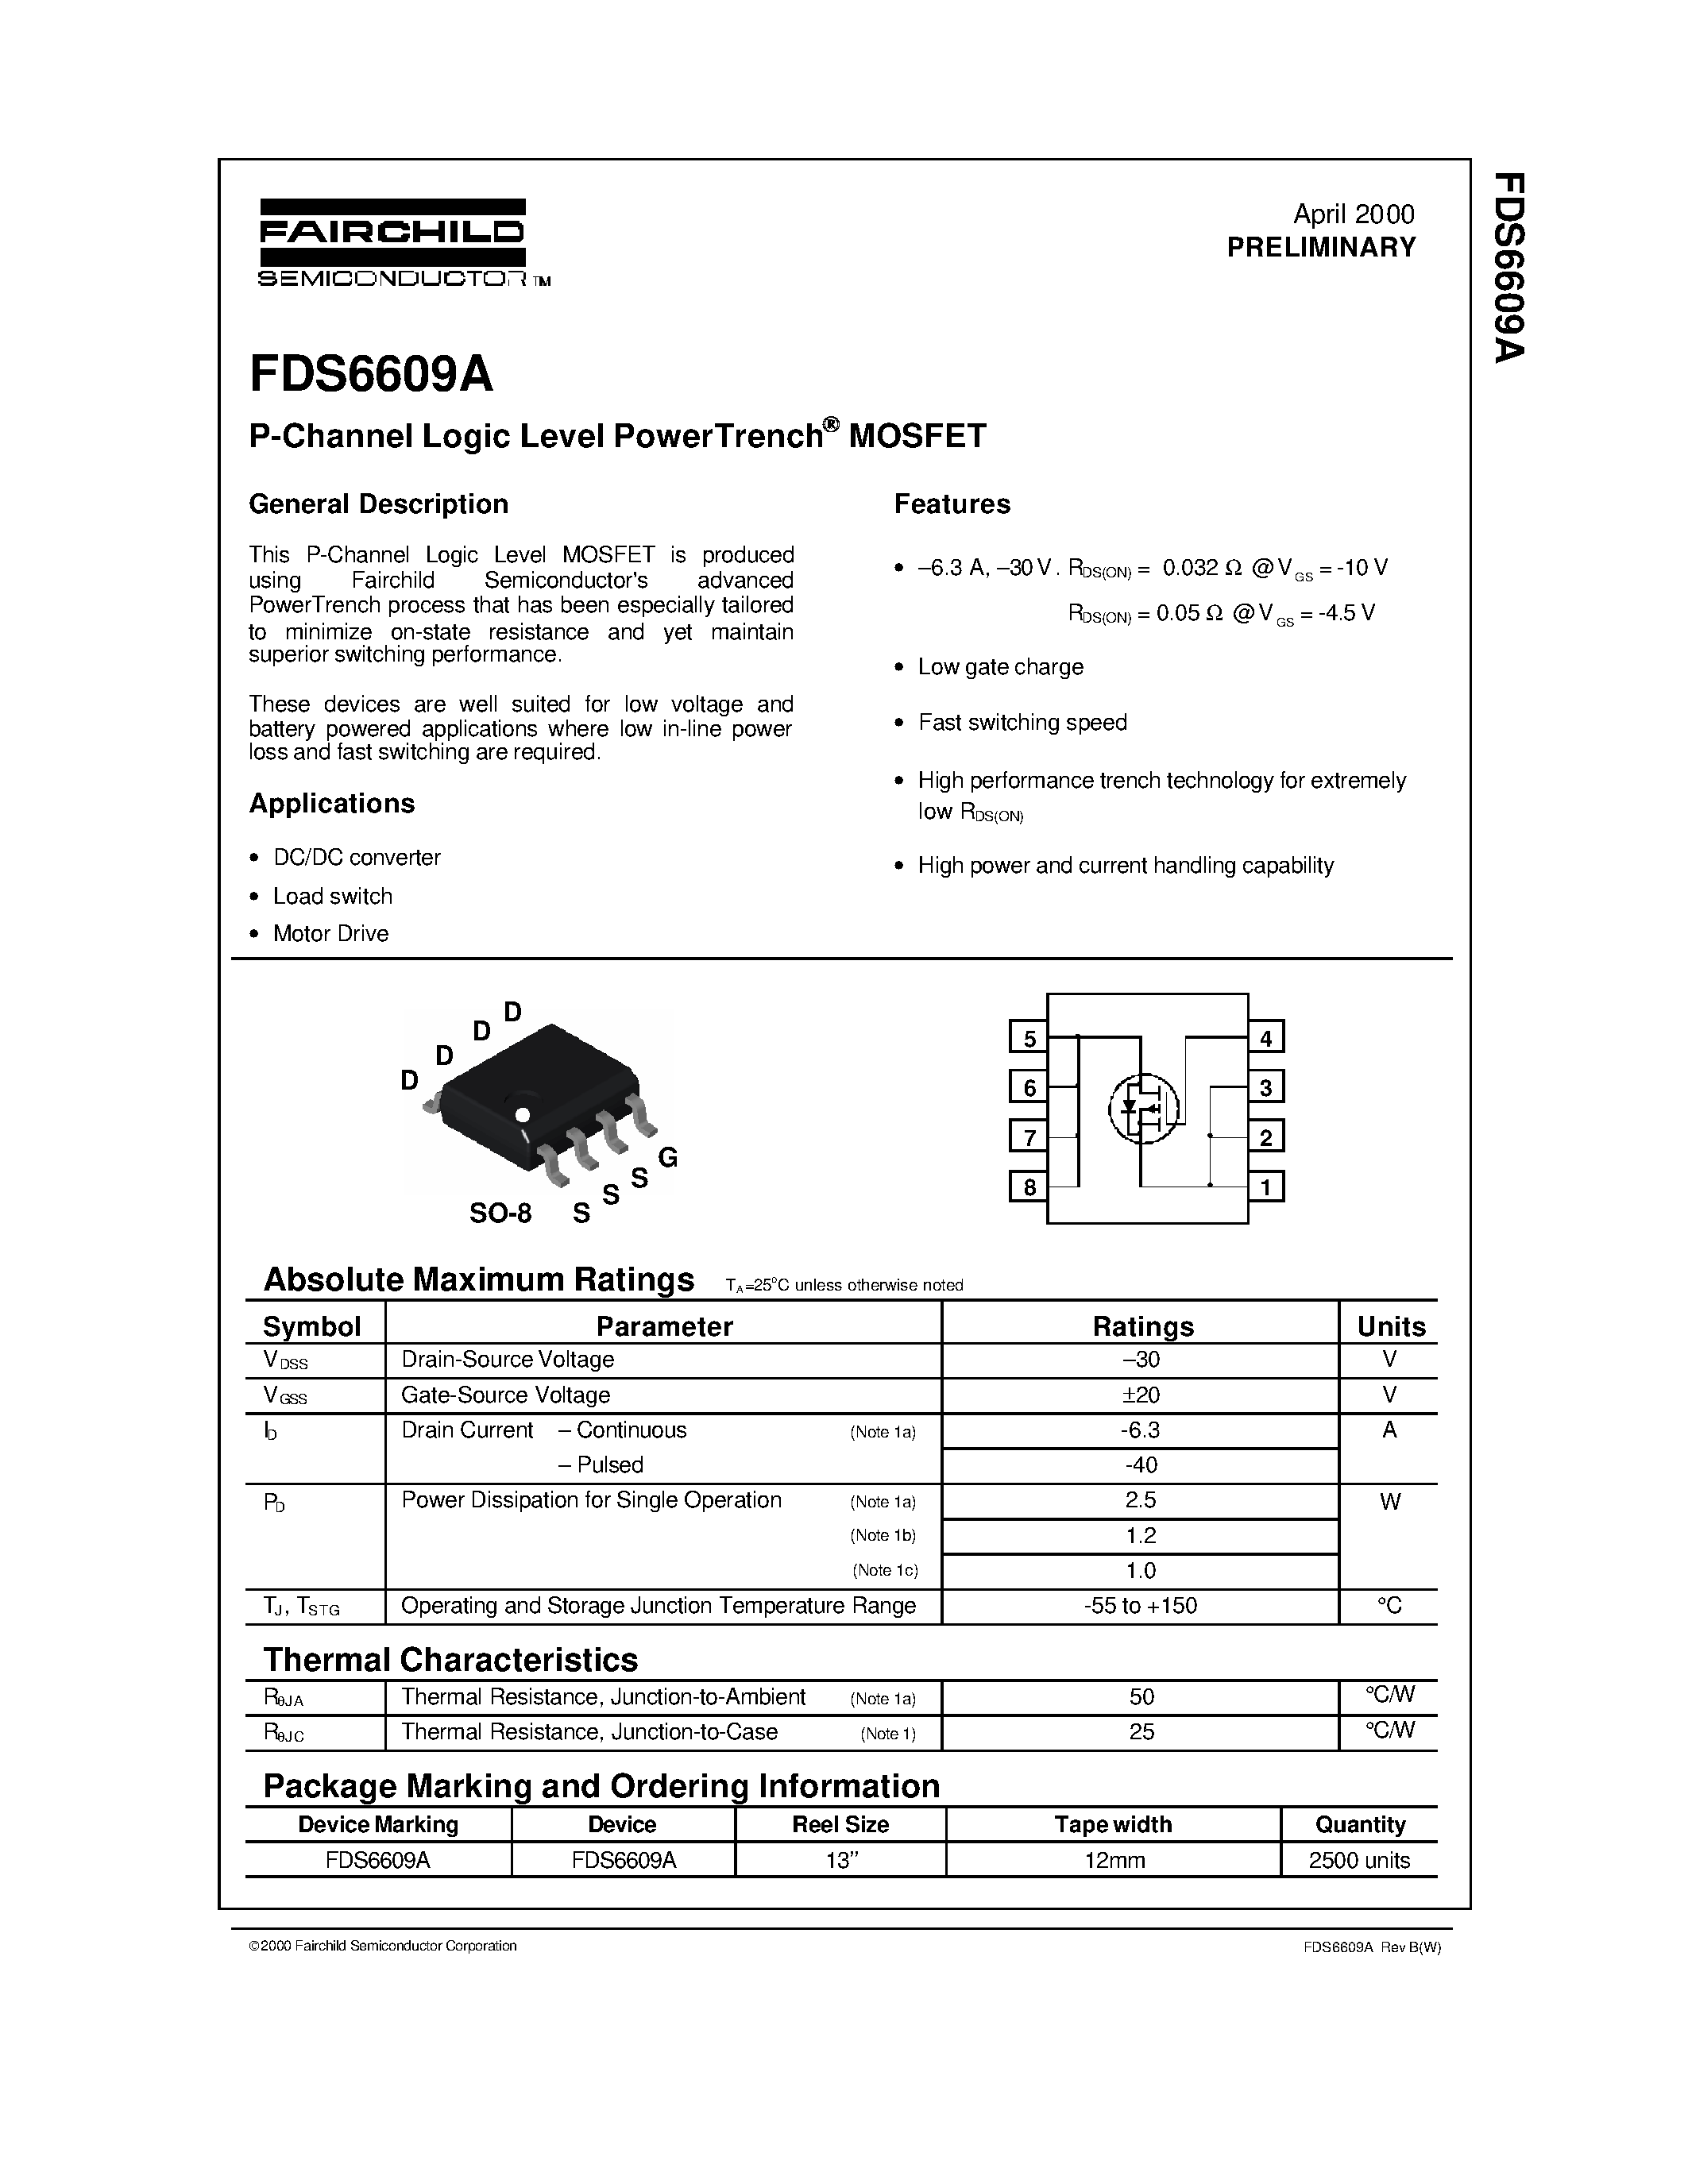 Datasheet FDS6609A - P-Channel Logic Level PowerTrench MOSFET page 1